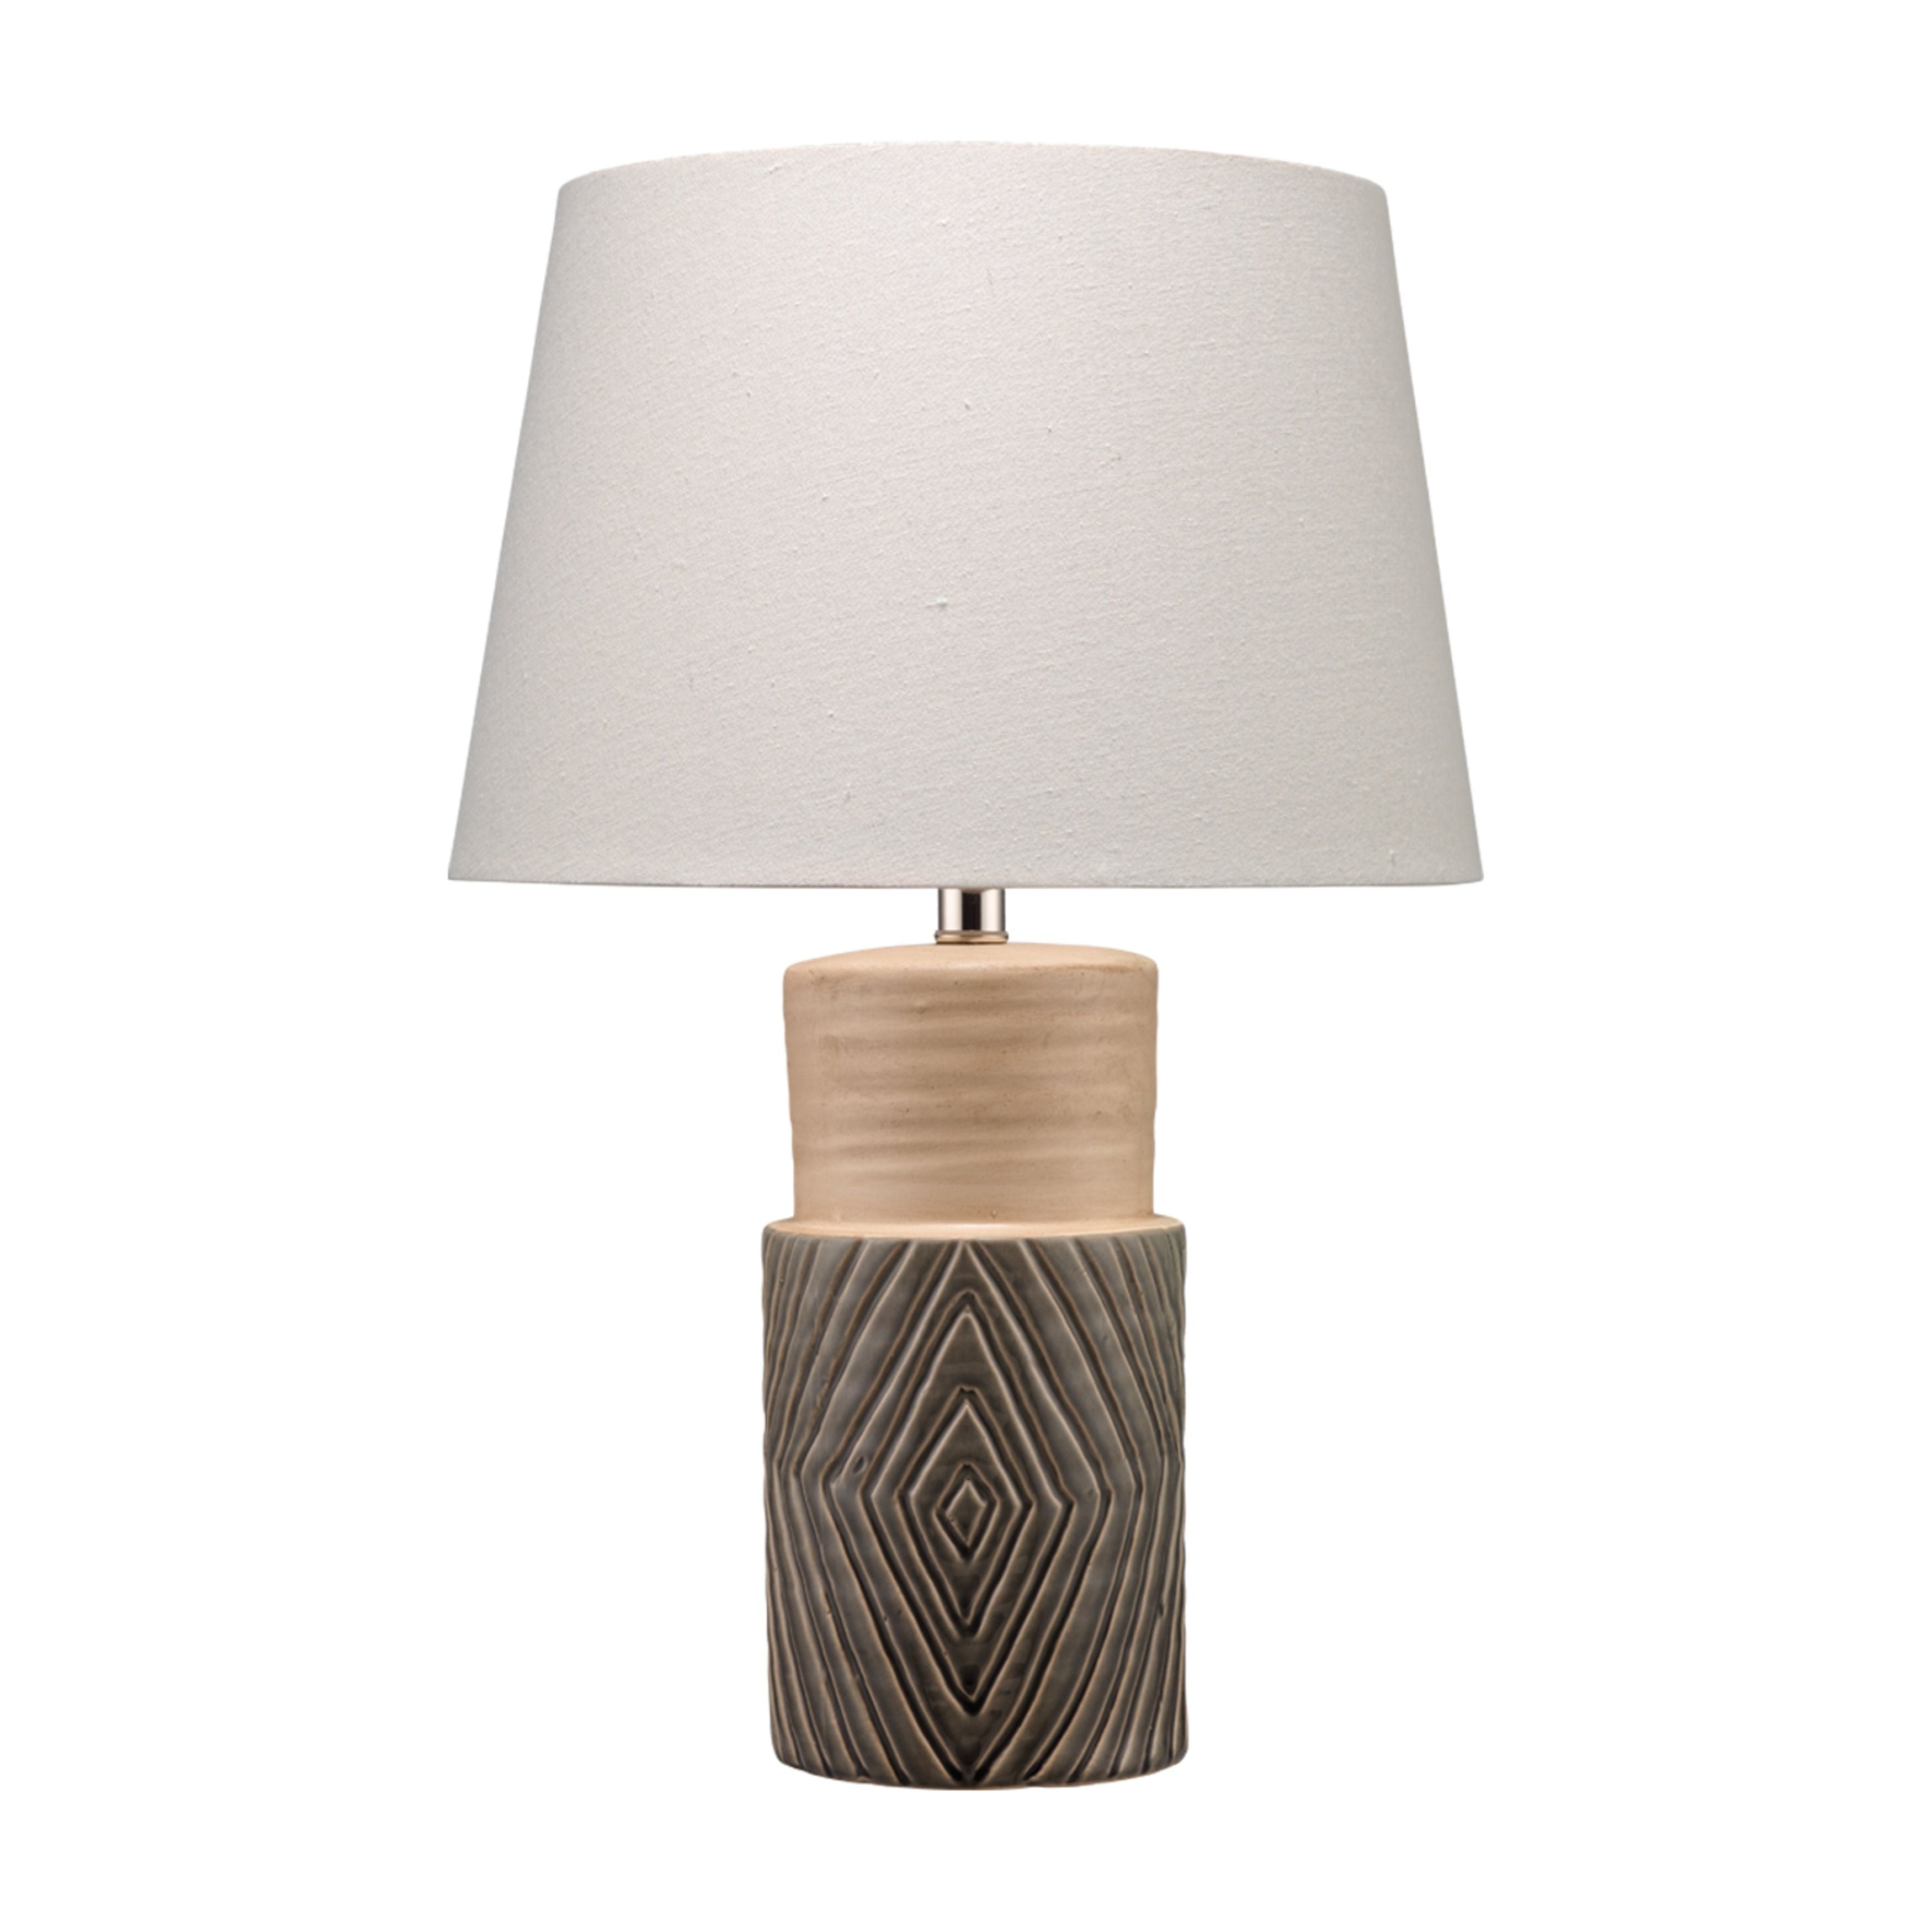 Jamie Young Company - BL217-TL8 - Ripple Table Lamp - Ripple - Grey